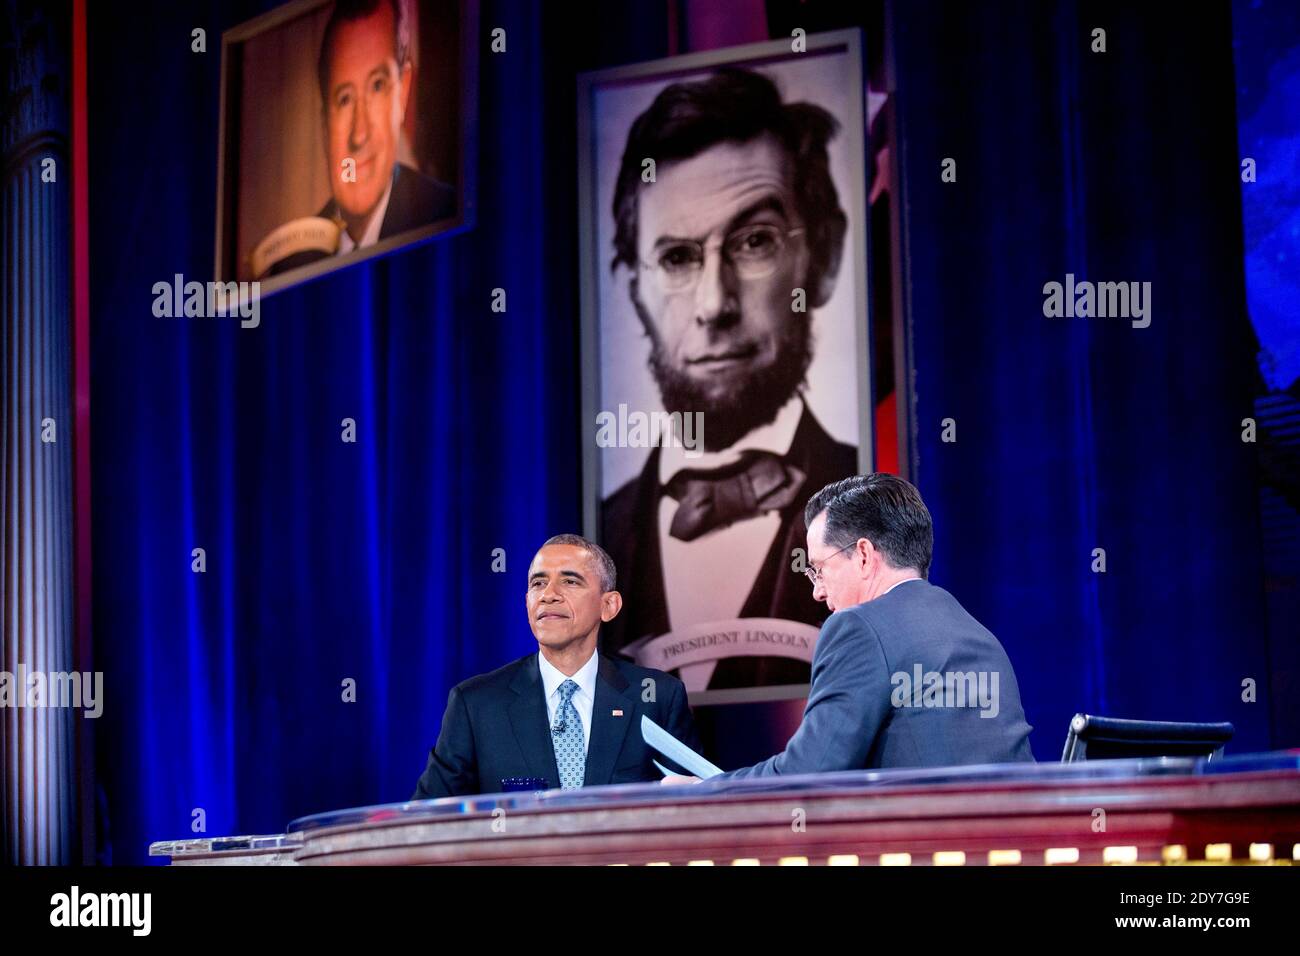 U.S. President Barack Obama, left, tapes Comedy Centrals The Colbert Report with television personality Stephen Colbert in Lisner Auditorium at George Washington University in Washington, DC, USA, on Monday, December 8, 2014. This is President Obamas third appearance on The Colbert Report that will broadcast its final show on December 18. Photo by Andrew Harrer/Pool/ABACAPRESS.COM Stock Photo